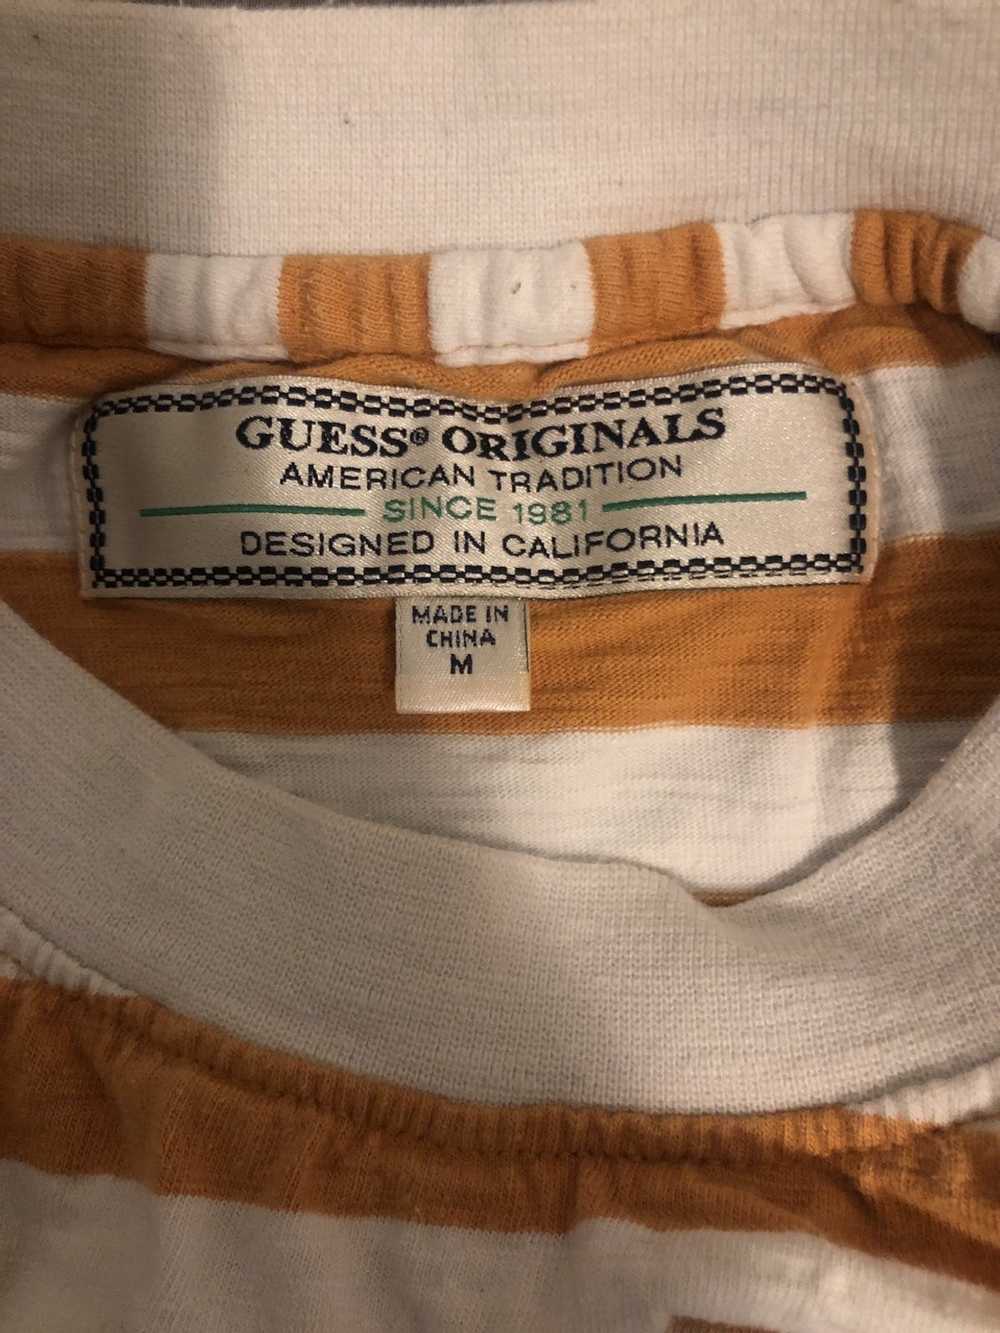 Guess Deadstock Vintage Guess Shirt - M - image 3